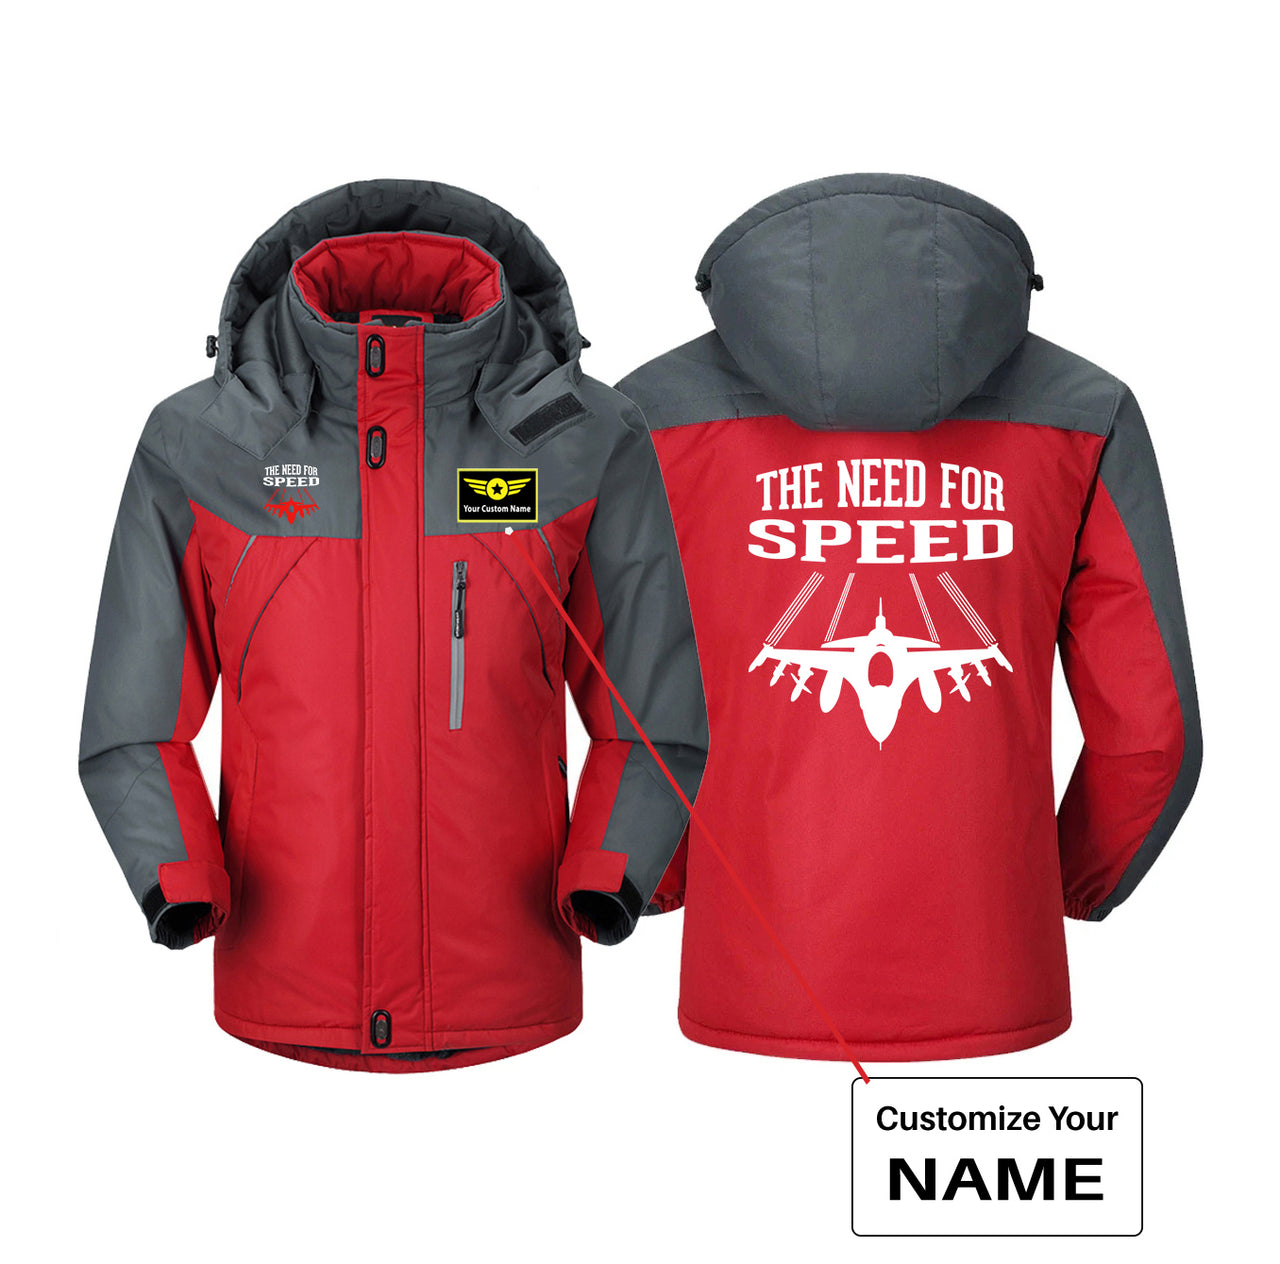 The Need For Speed Designed Thick Winter Jackets